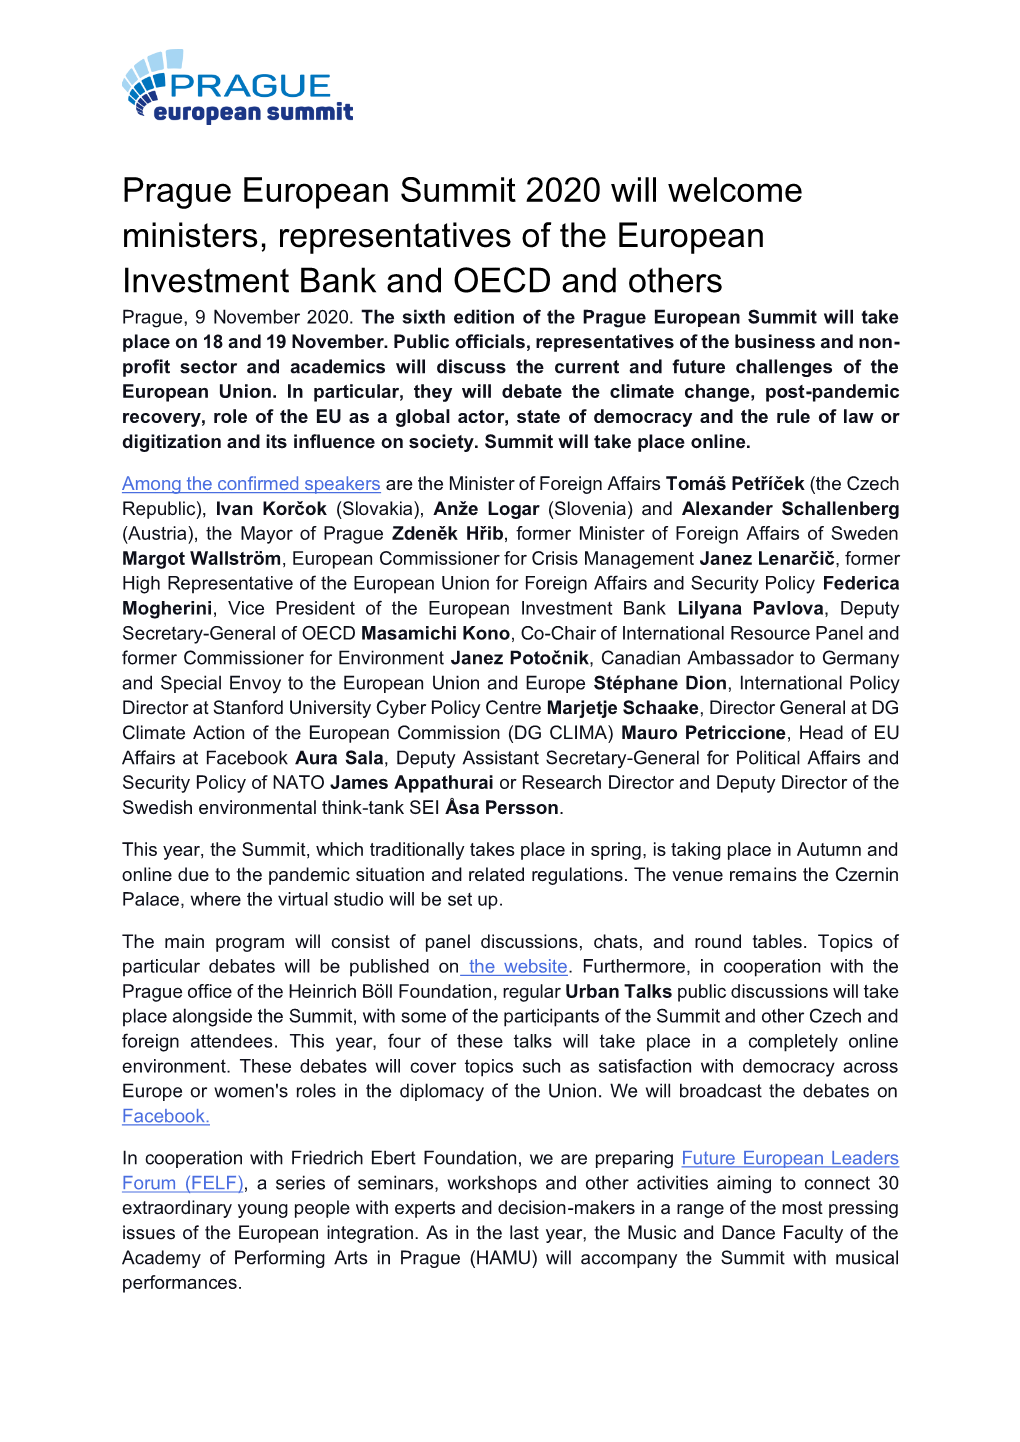 Prague European Summit 2020 Will Welcome Ministers, Representatives of the European Investment Bank and OECD and Others Prague, 9 November 2020